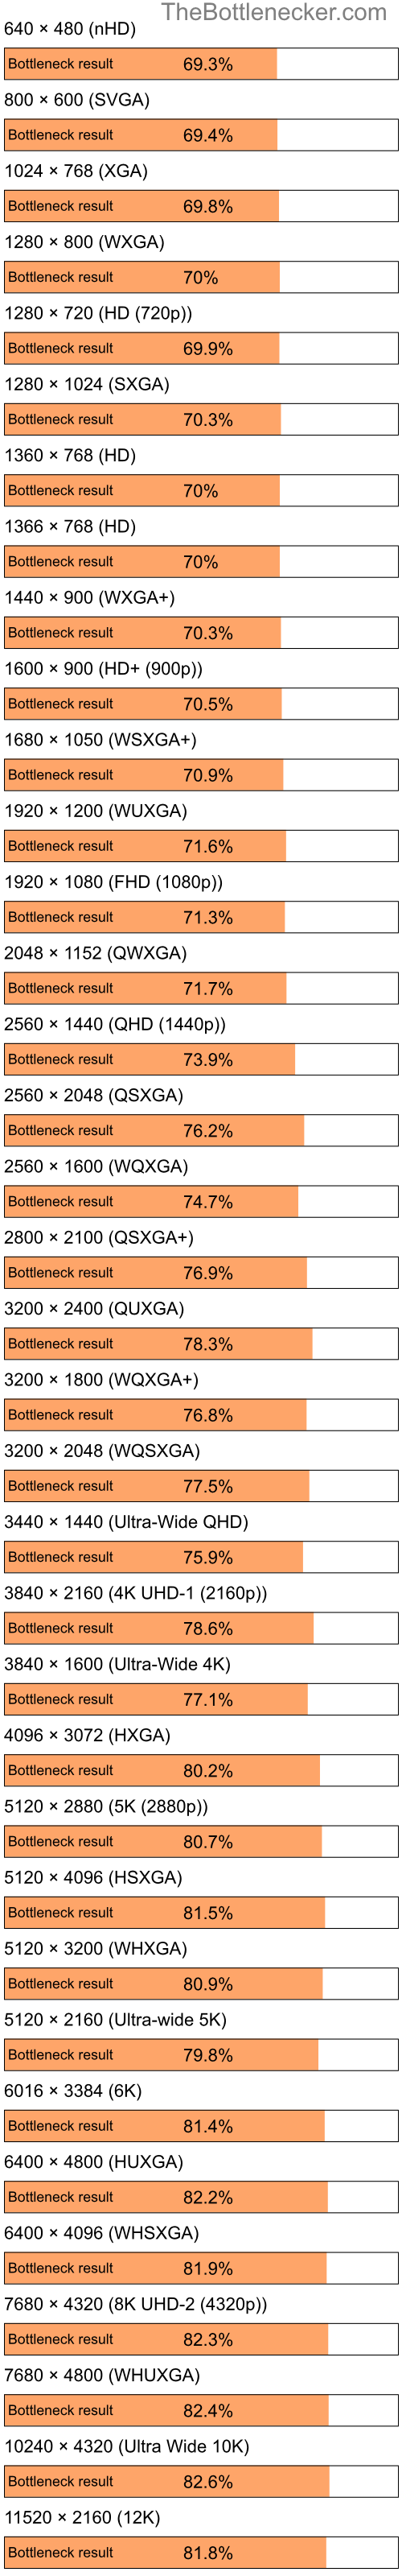 Bottleneck results by resolution for Intel Celeron M 410 and NVIDIA GeForce 9300 GS in Graphic Card Intense Tasks